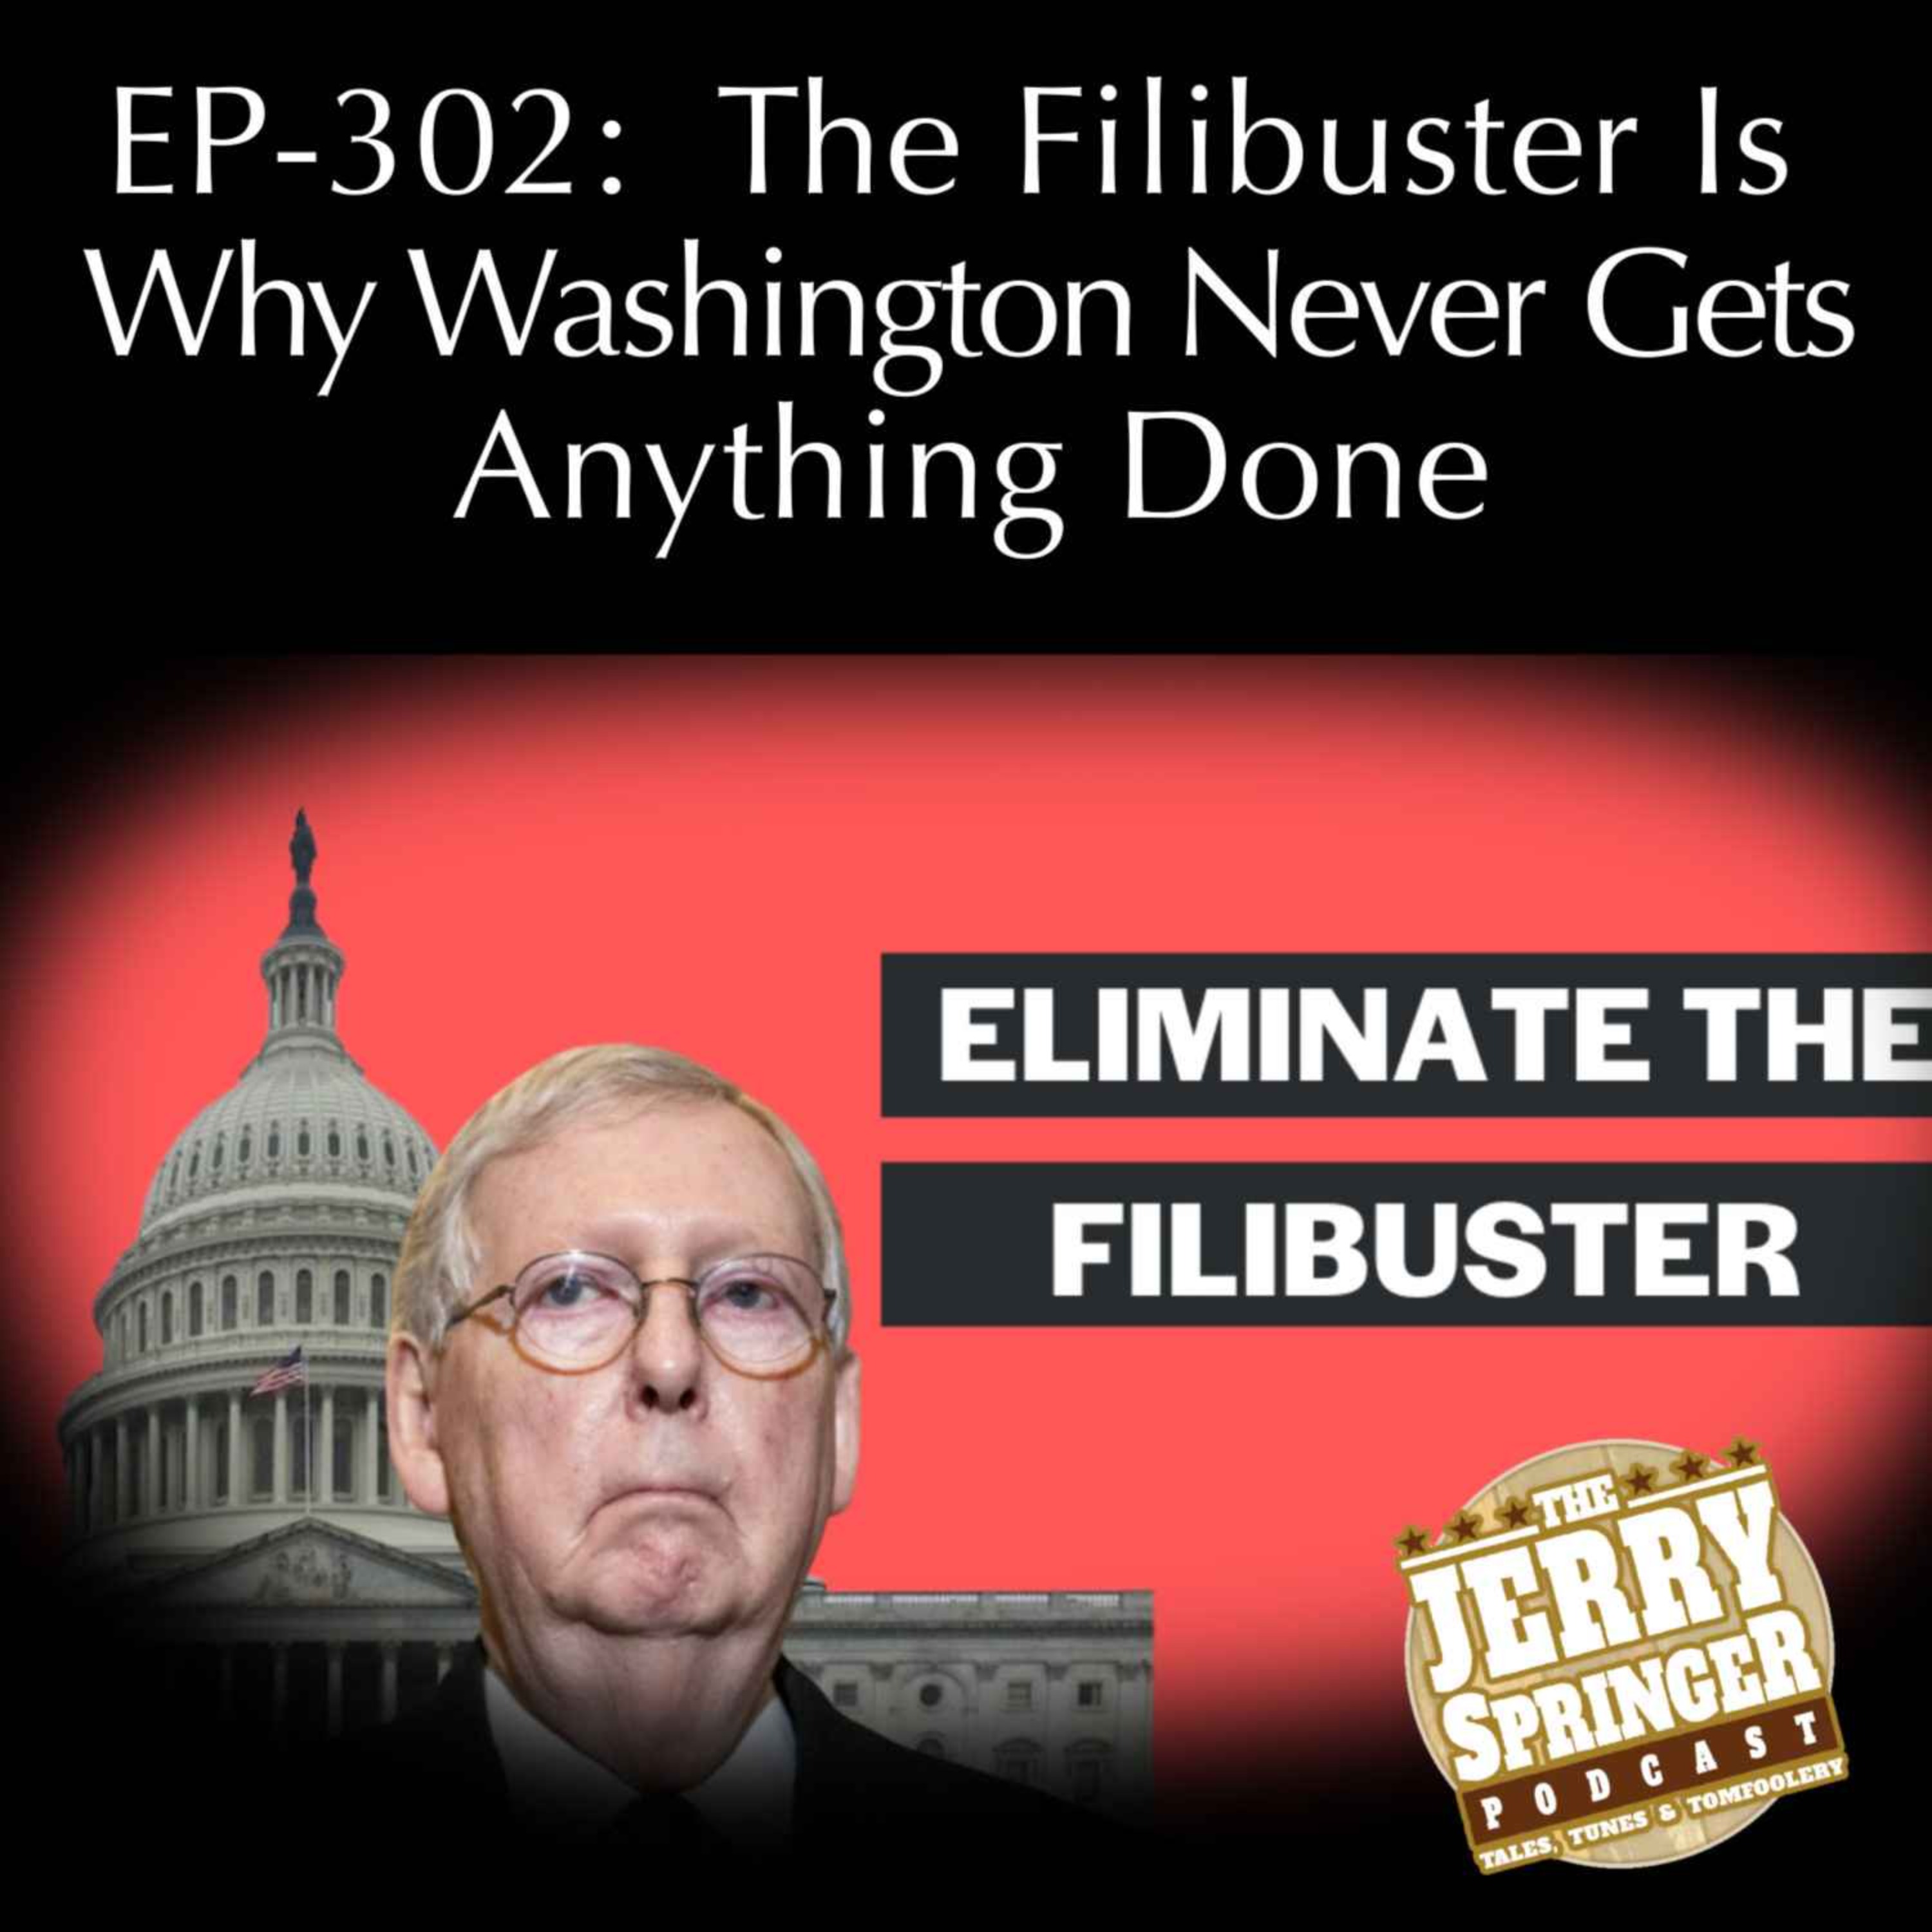 The Filibuster Is Why Washington Never Gets Anything Done: EP-302